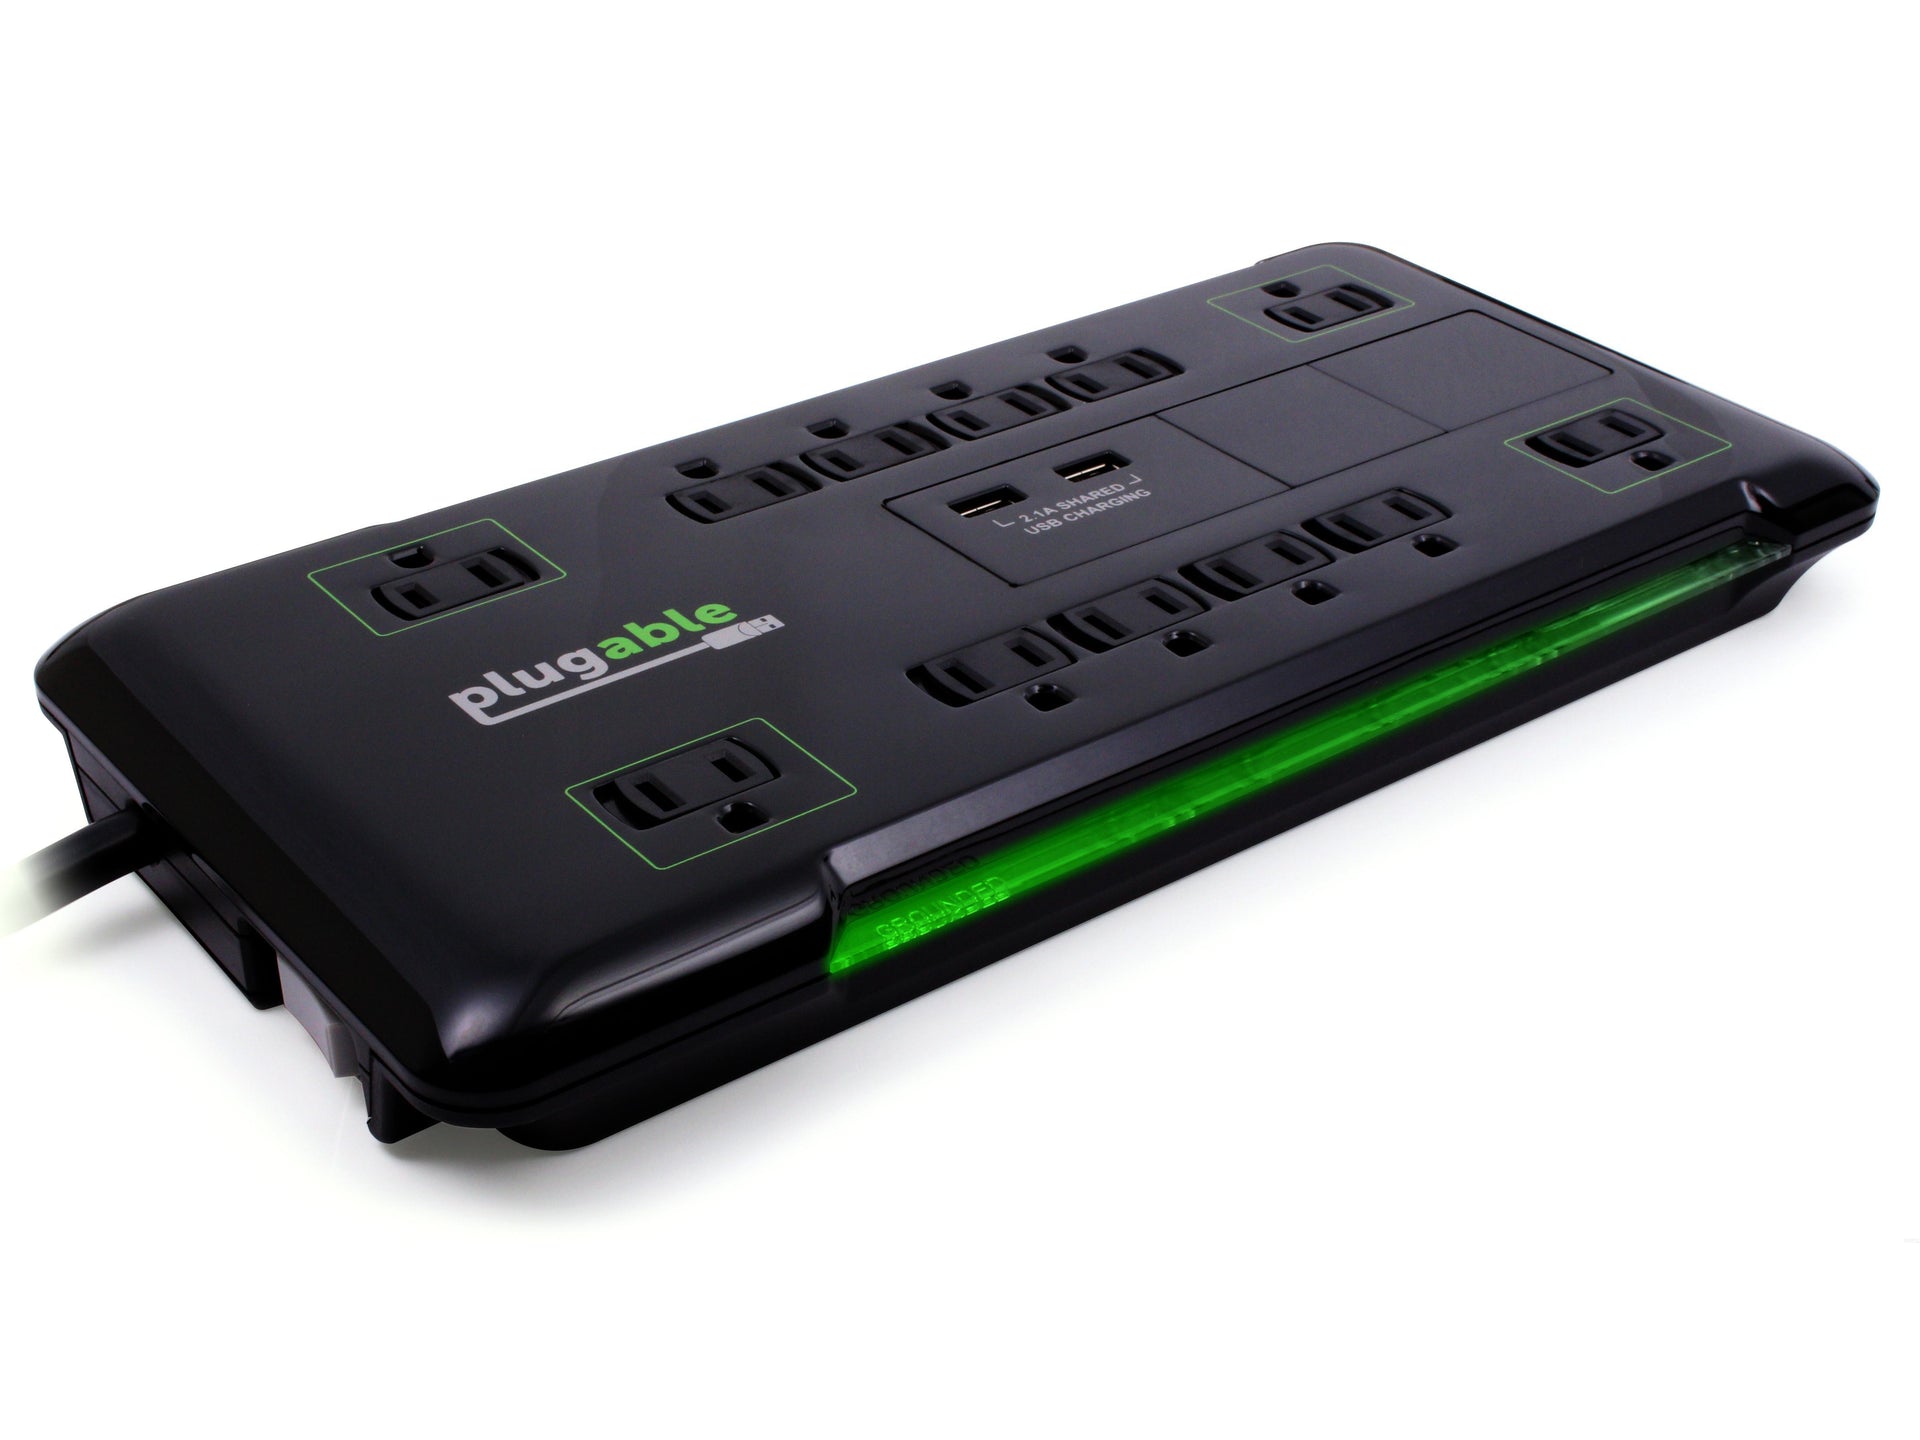 Power Strip With 4 Outlets 4 Usb Ports Home Office Wifi Remote